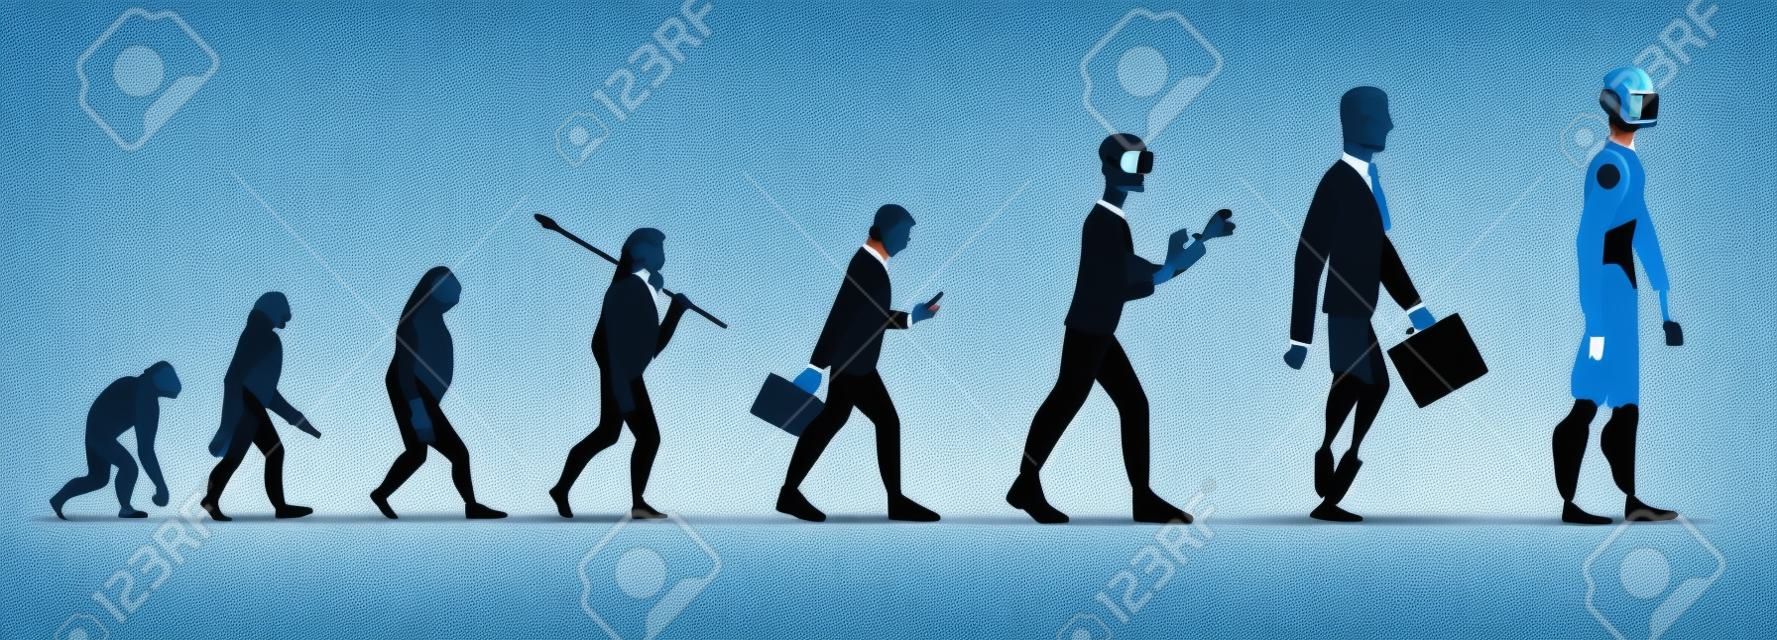 Vector evolution concept with ape to cyborg and robots growth process with monkey, caveman to businessman in suit wearing VR headset, artificial legs person and robotic creature. Mankind development